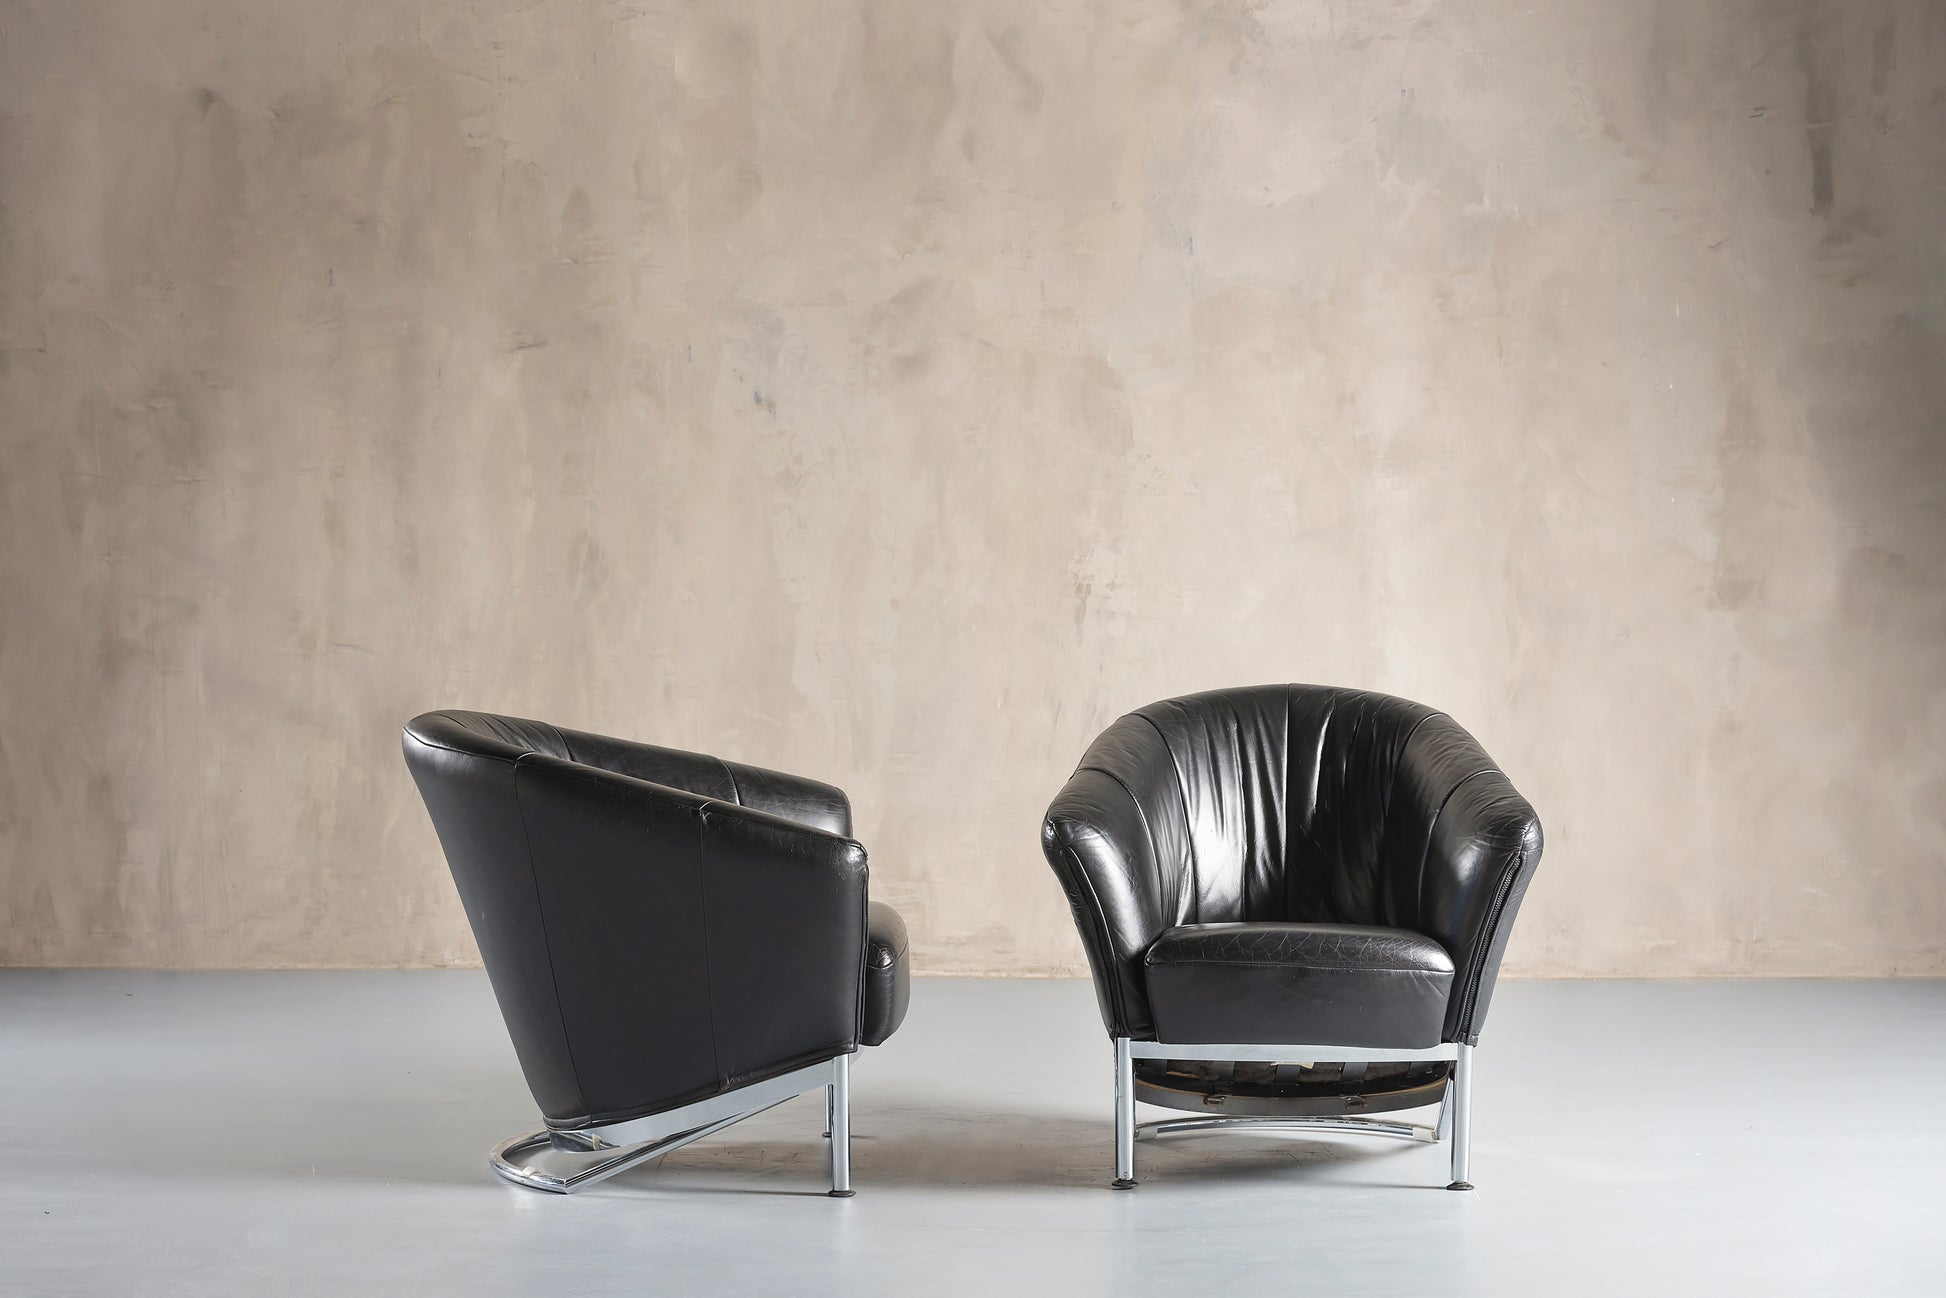 Two black leather chairs